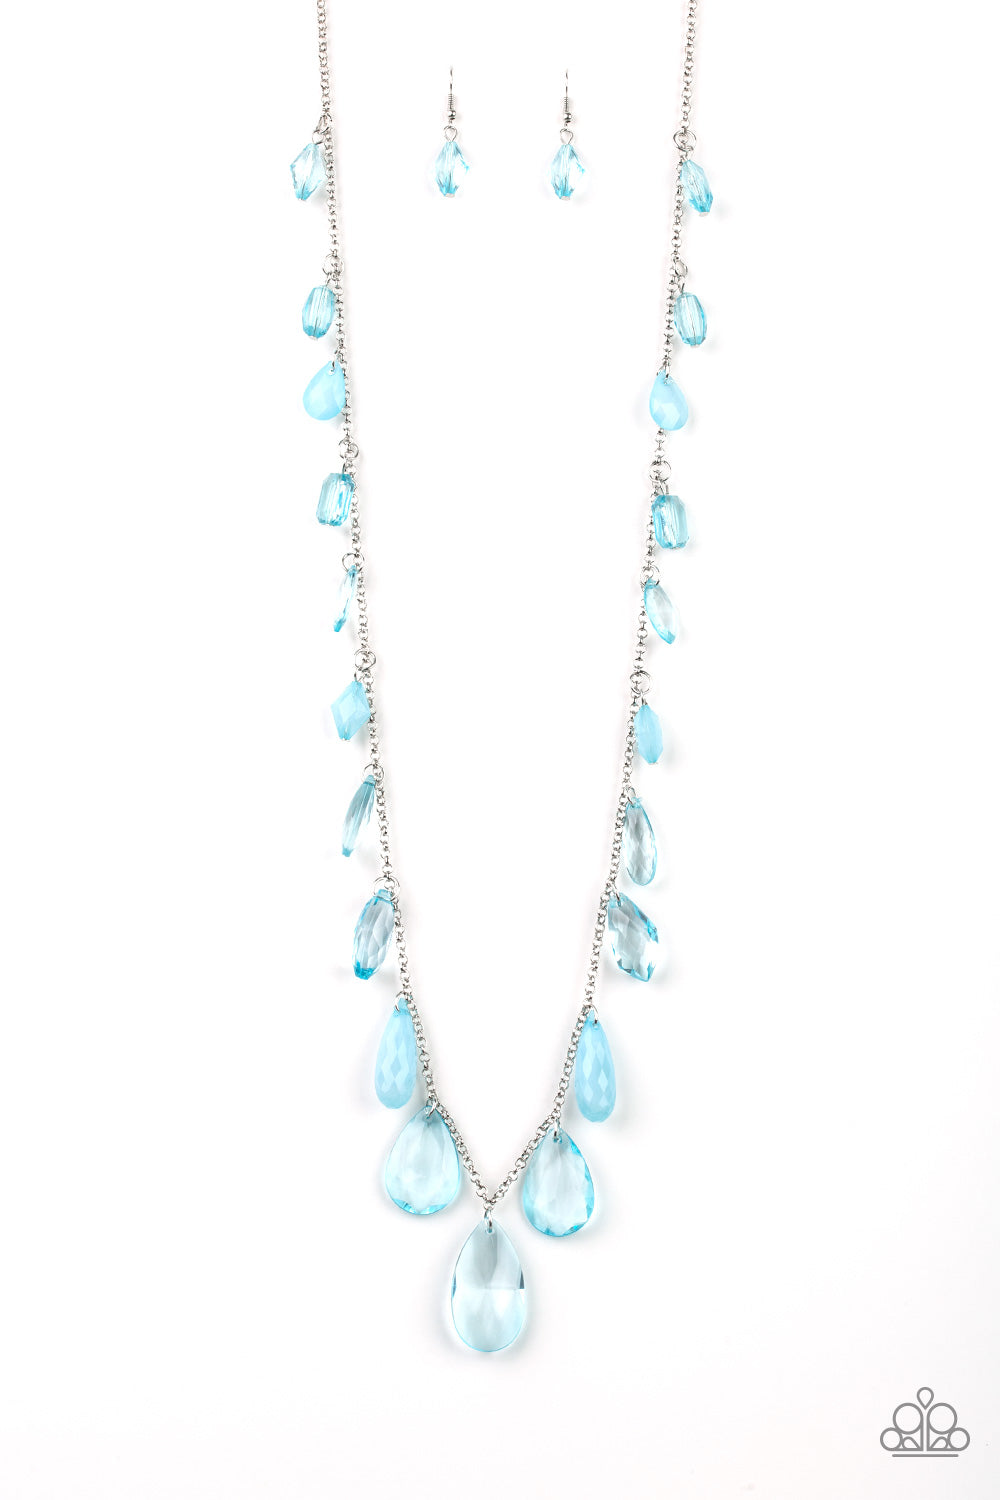 GLOW And Steady Wins The Race - Blue Necklace